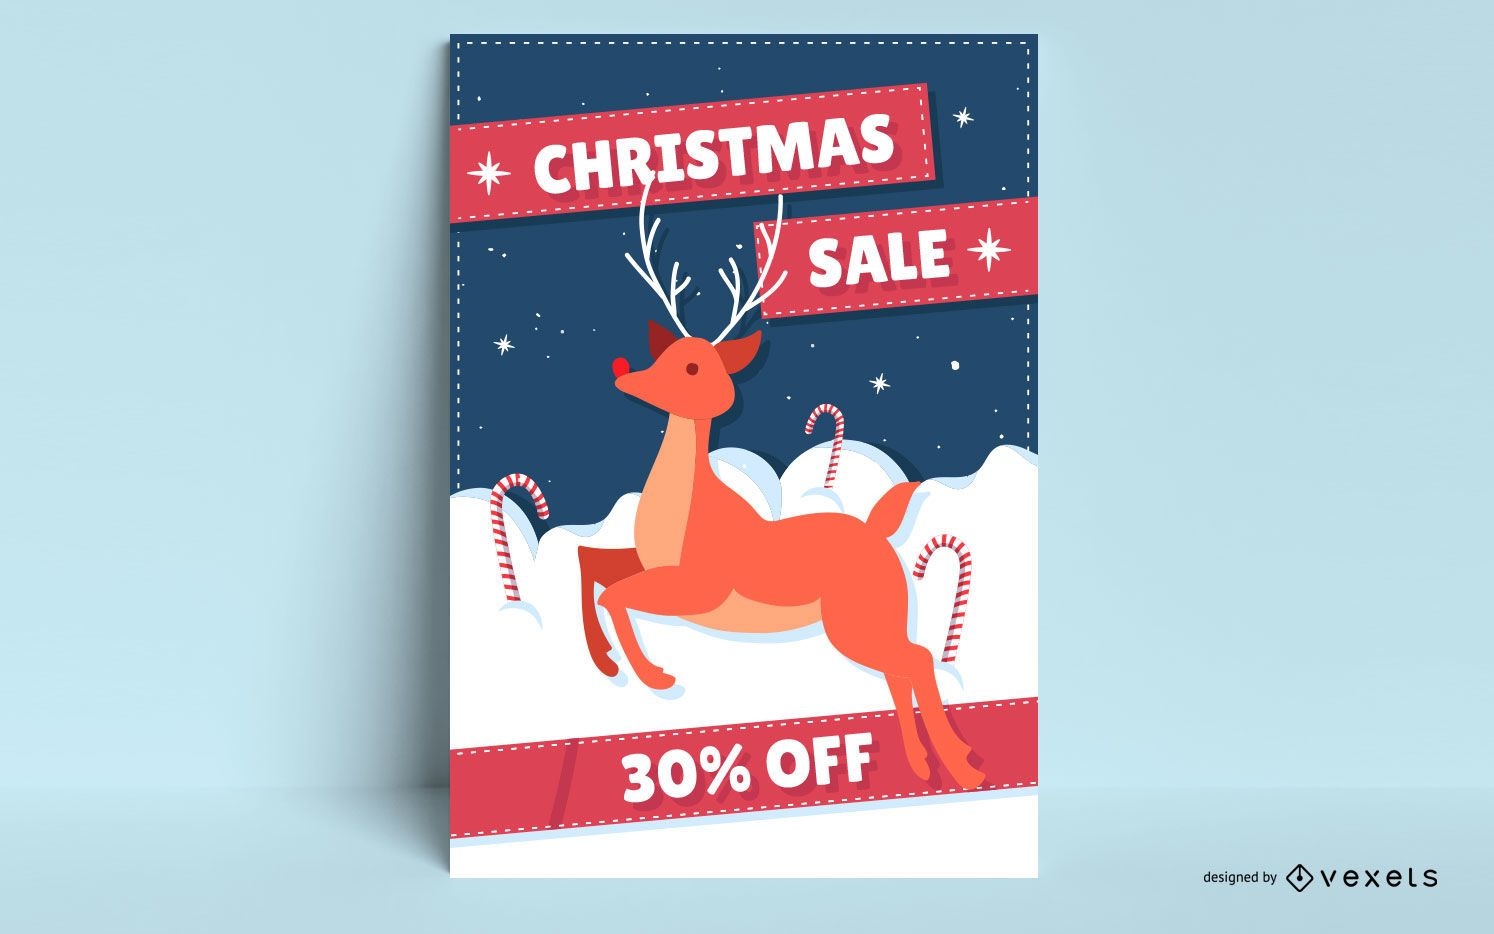 Christmas sale rudolph poster